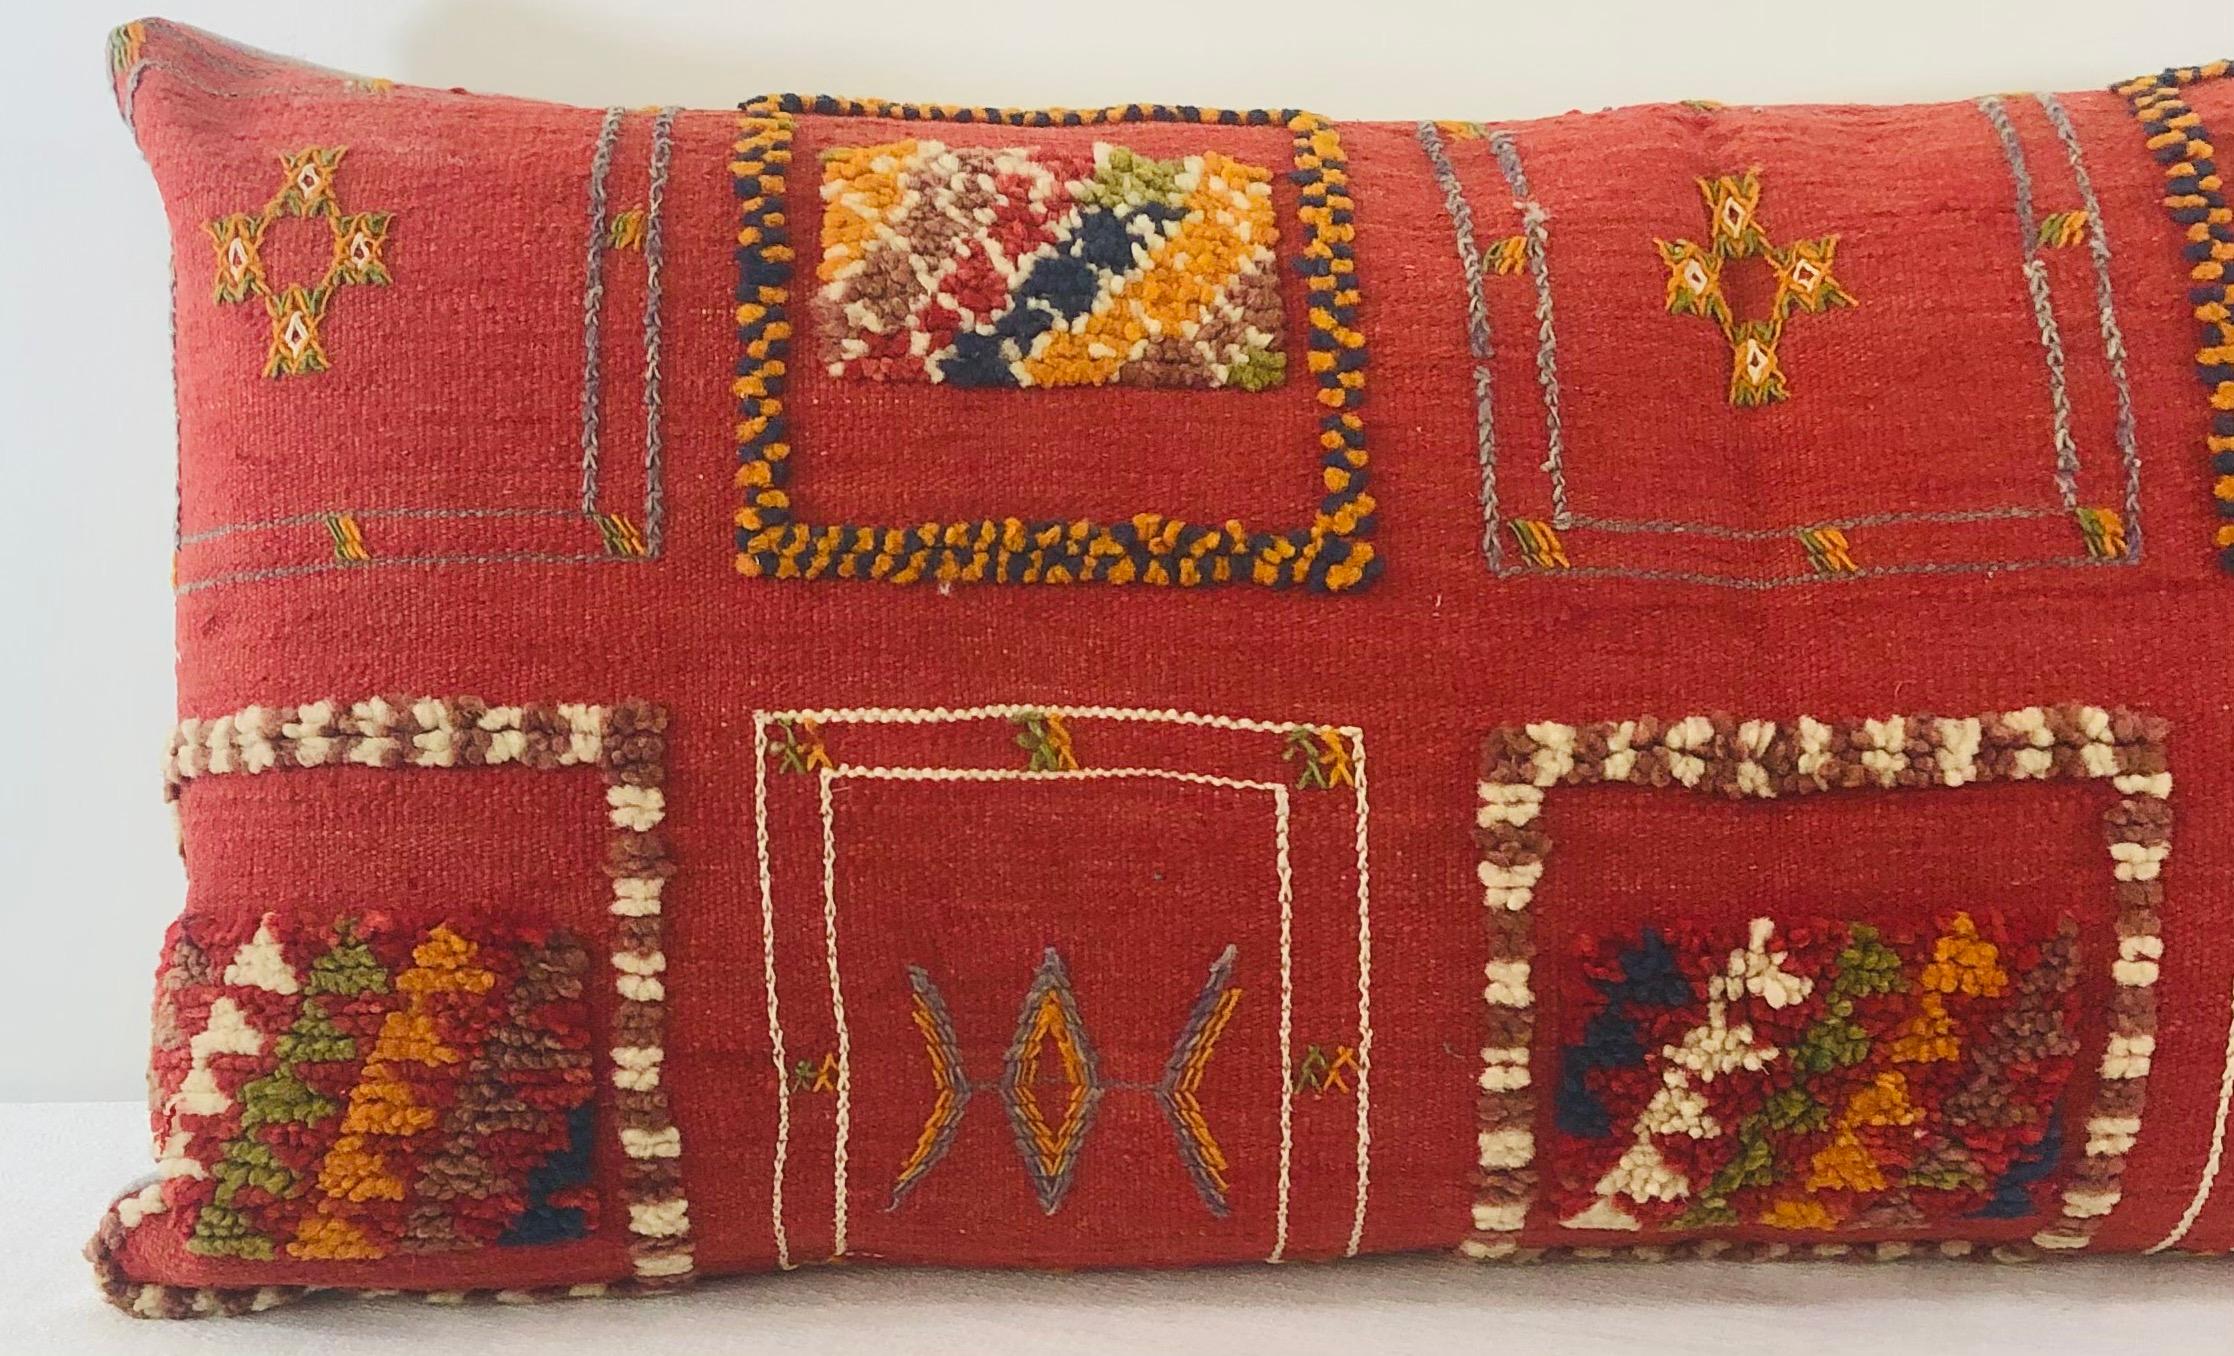 Featuring vivid and earthy burgundy, blue, off white and green colors, this stunning one-of-a-kind Kilim pillow is custom made from a vintage Moroccan wool rug handwoven in the Atlas Mountains in Morocco by Berber women artisans.

This beautiful